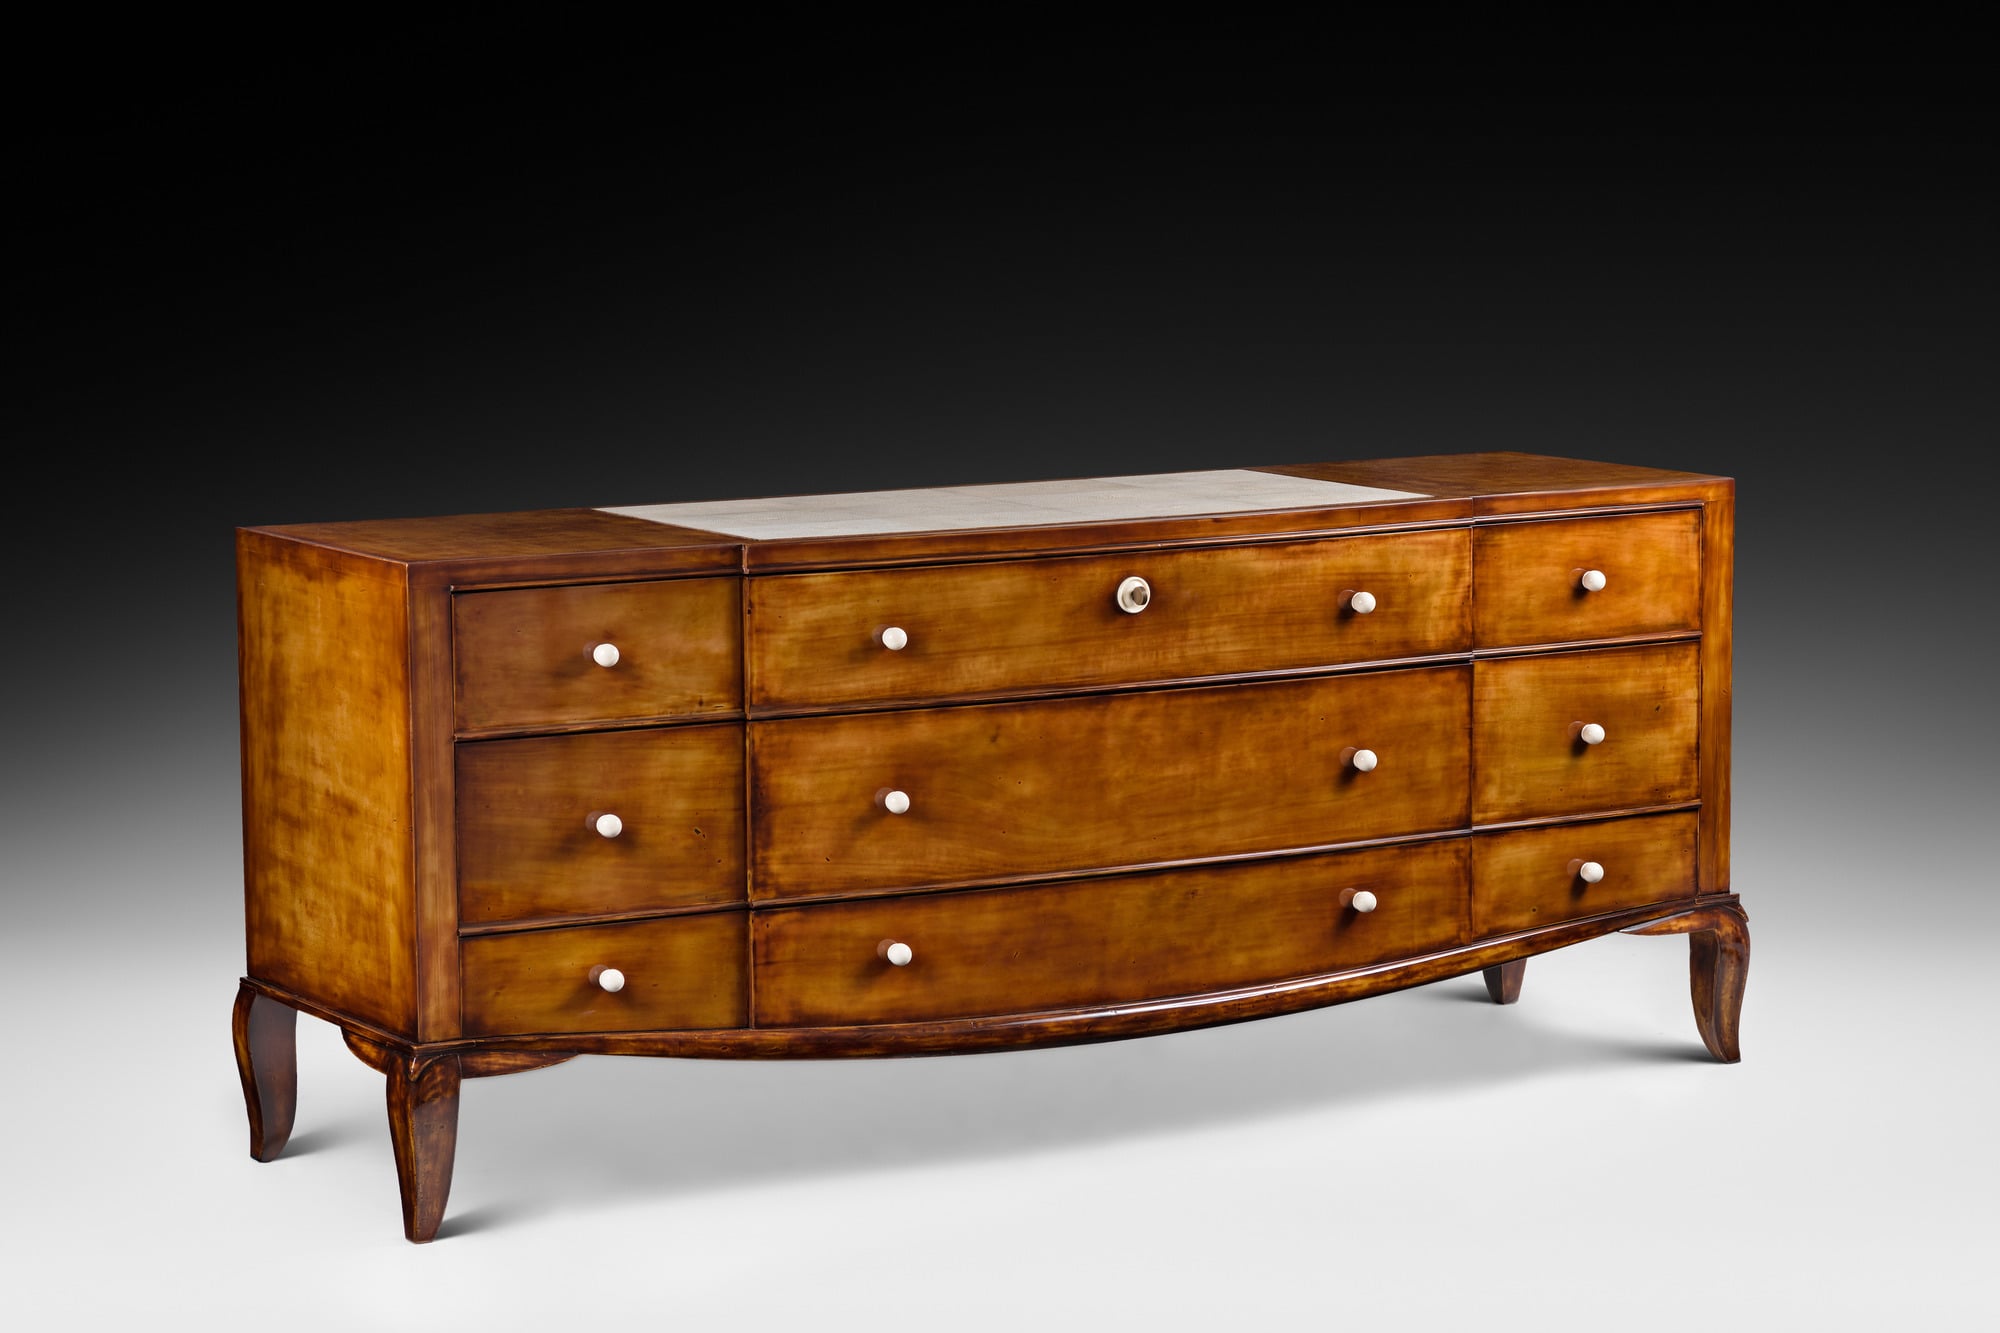 Rare ‘pantalonniere’ chest of drawers, vue 02